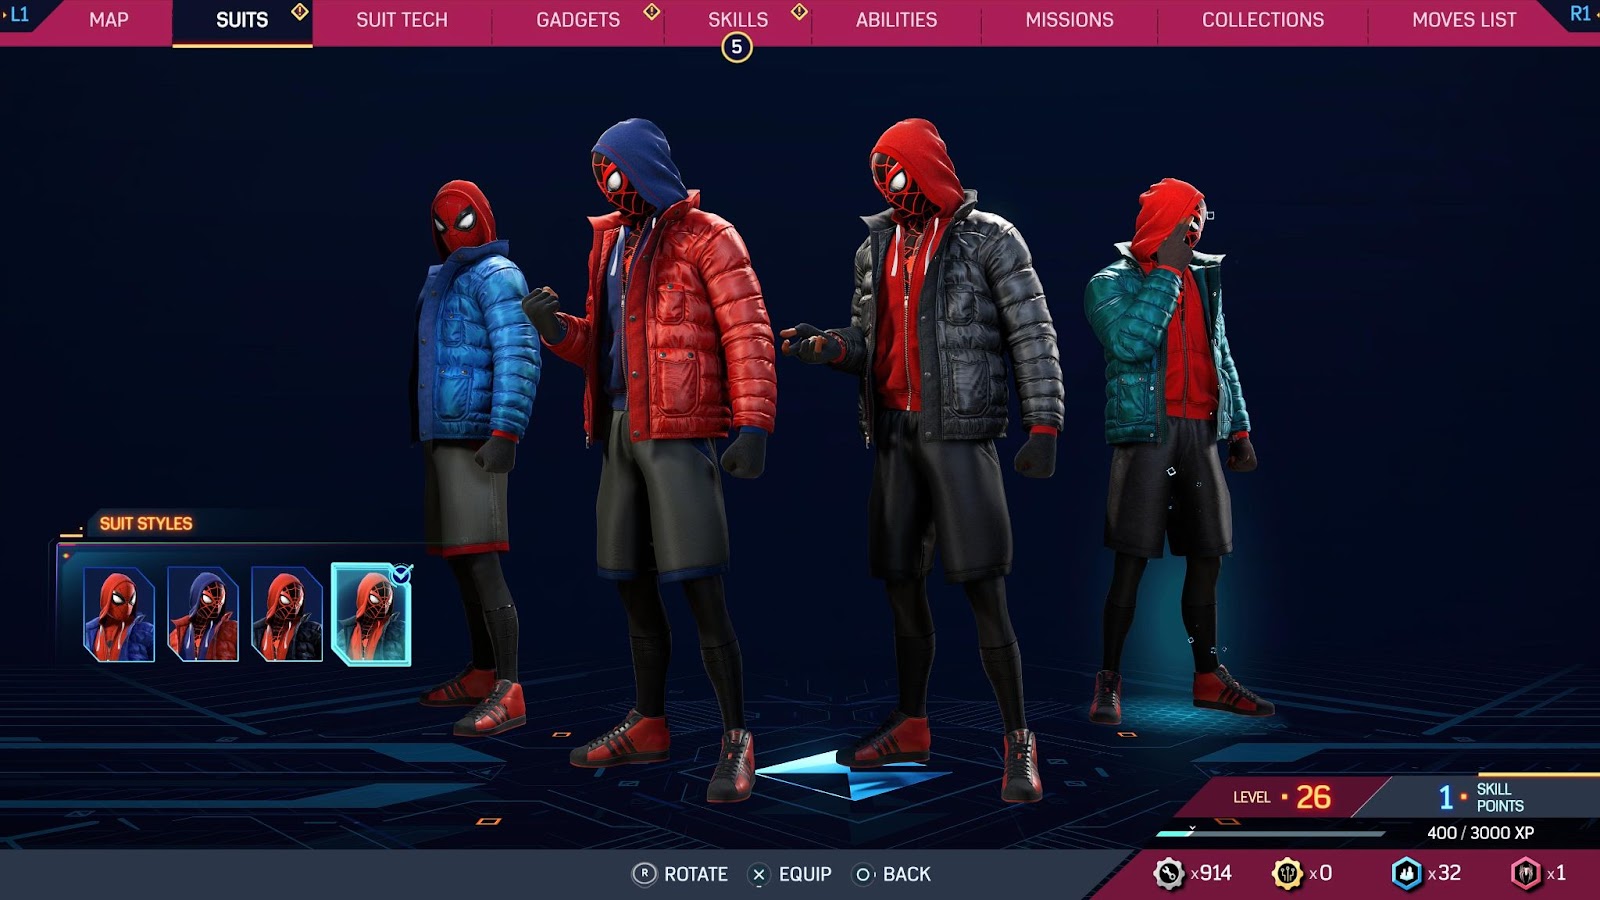 An in game screenshot of Miles Morales in the Sportswear suit from Marvel's Spider-Man 2